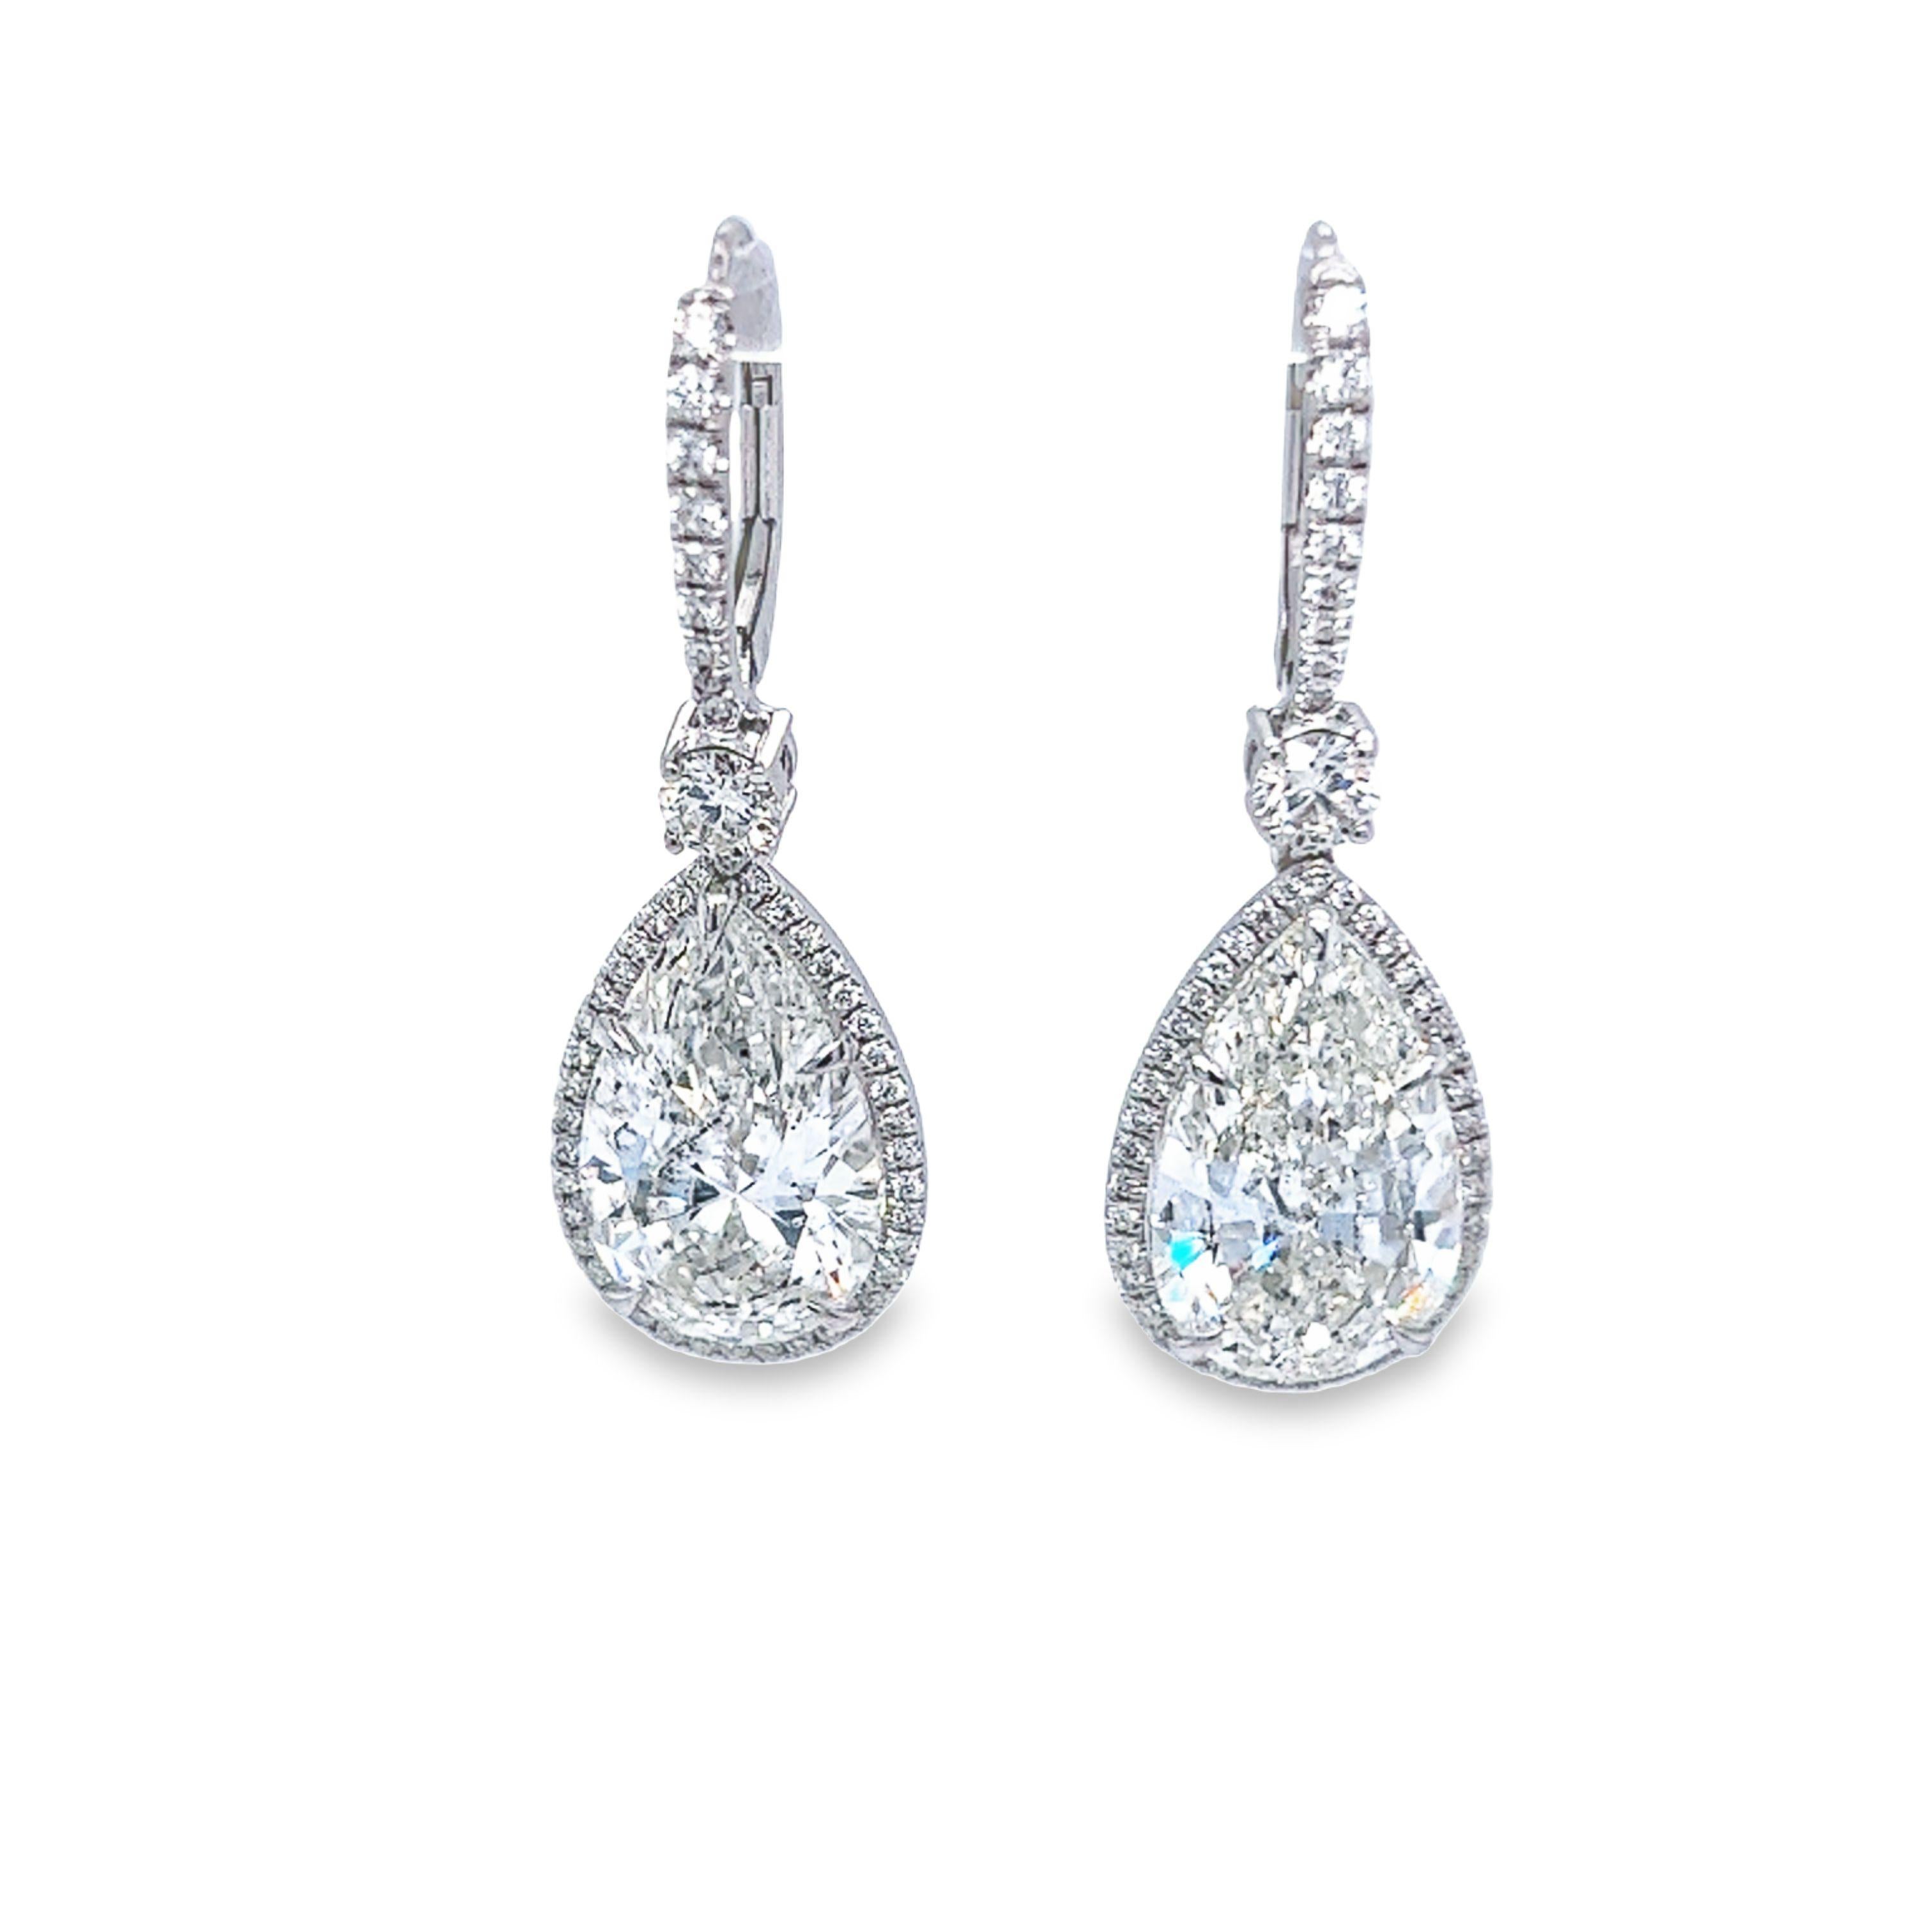 An impressive and rare 10.05 carat total weight matched pear shape with a color and clarity of J SI2 GIA certified. This exceptional SI2 is set in platinum surrounding the pear shapes is a very fine micro pave halo with a combined total carat weight